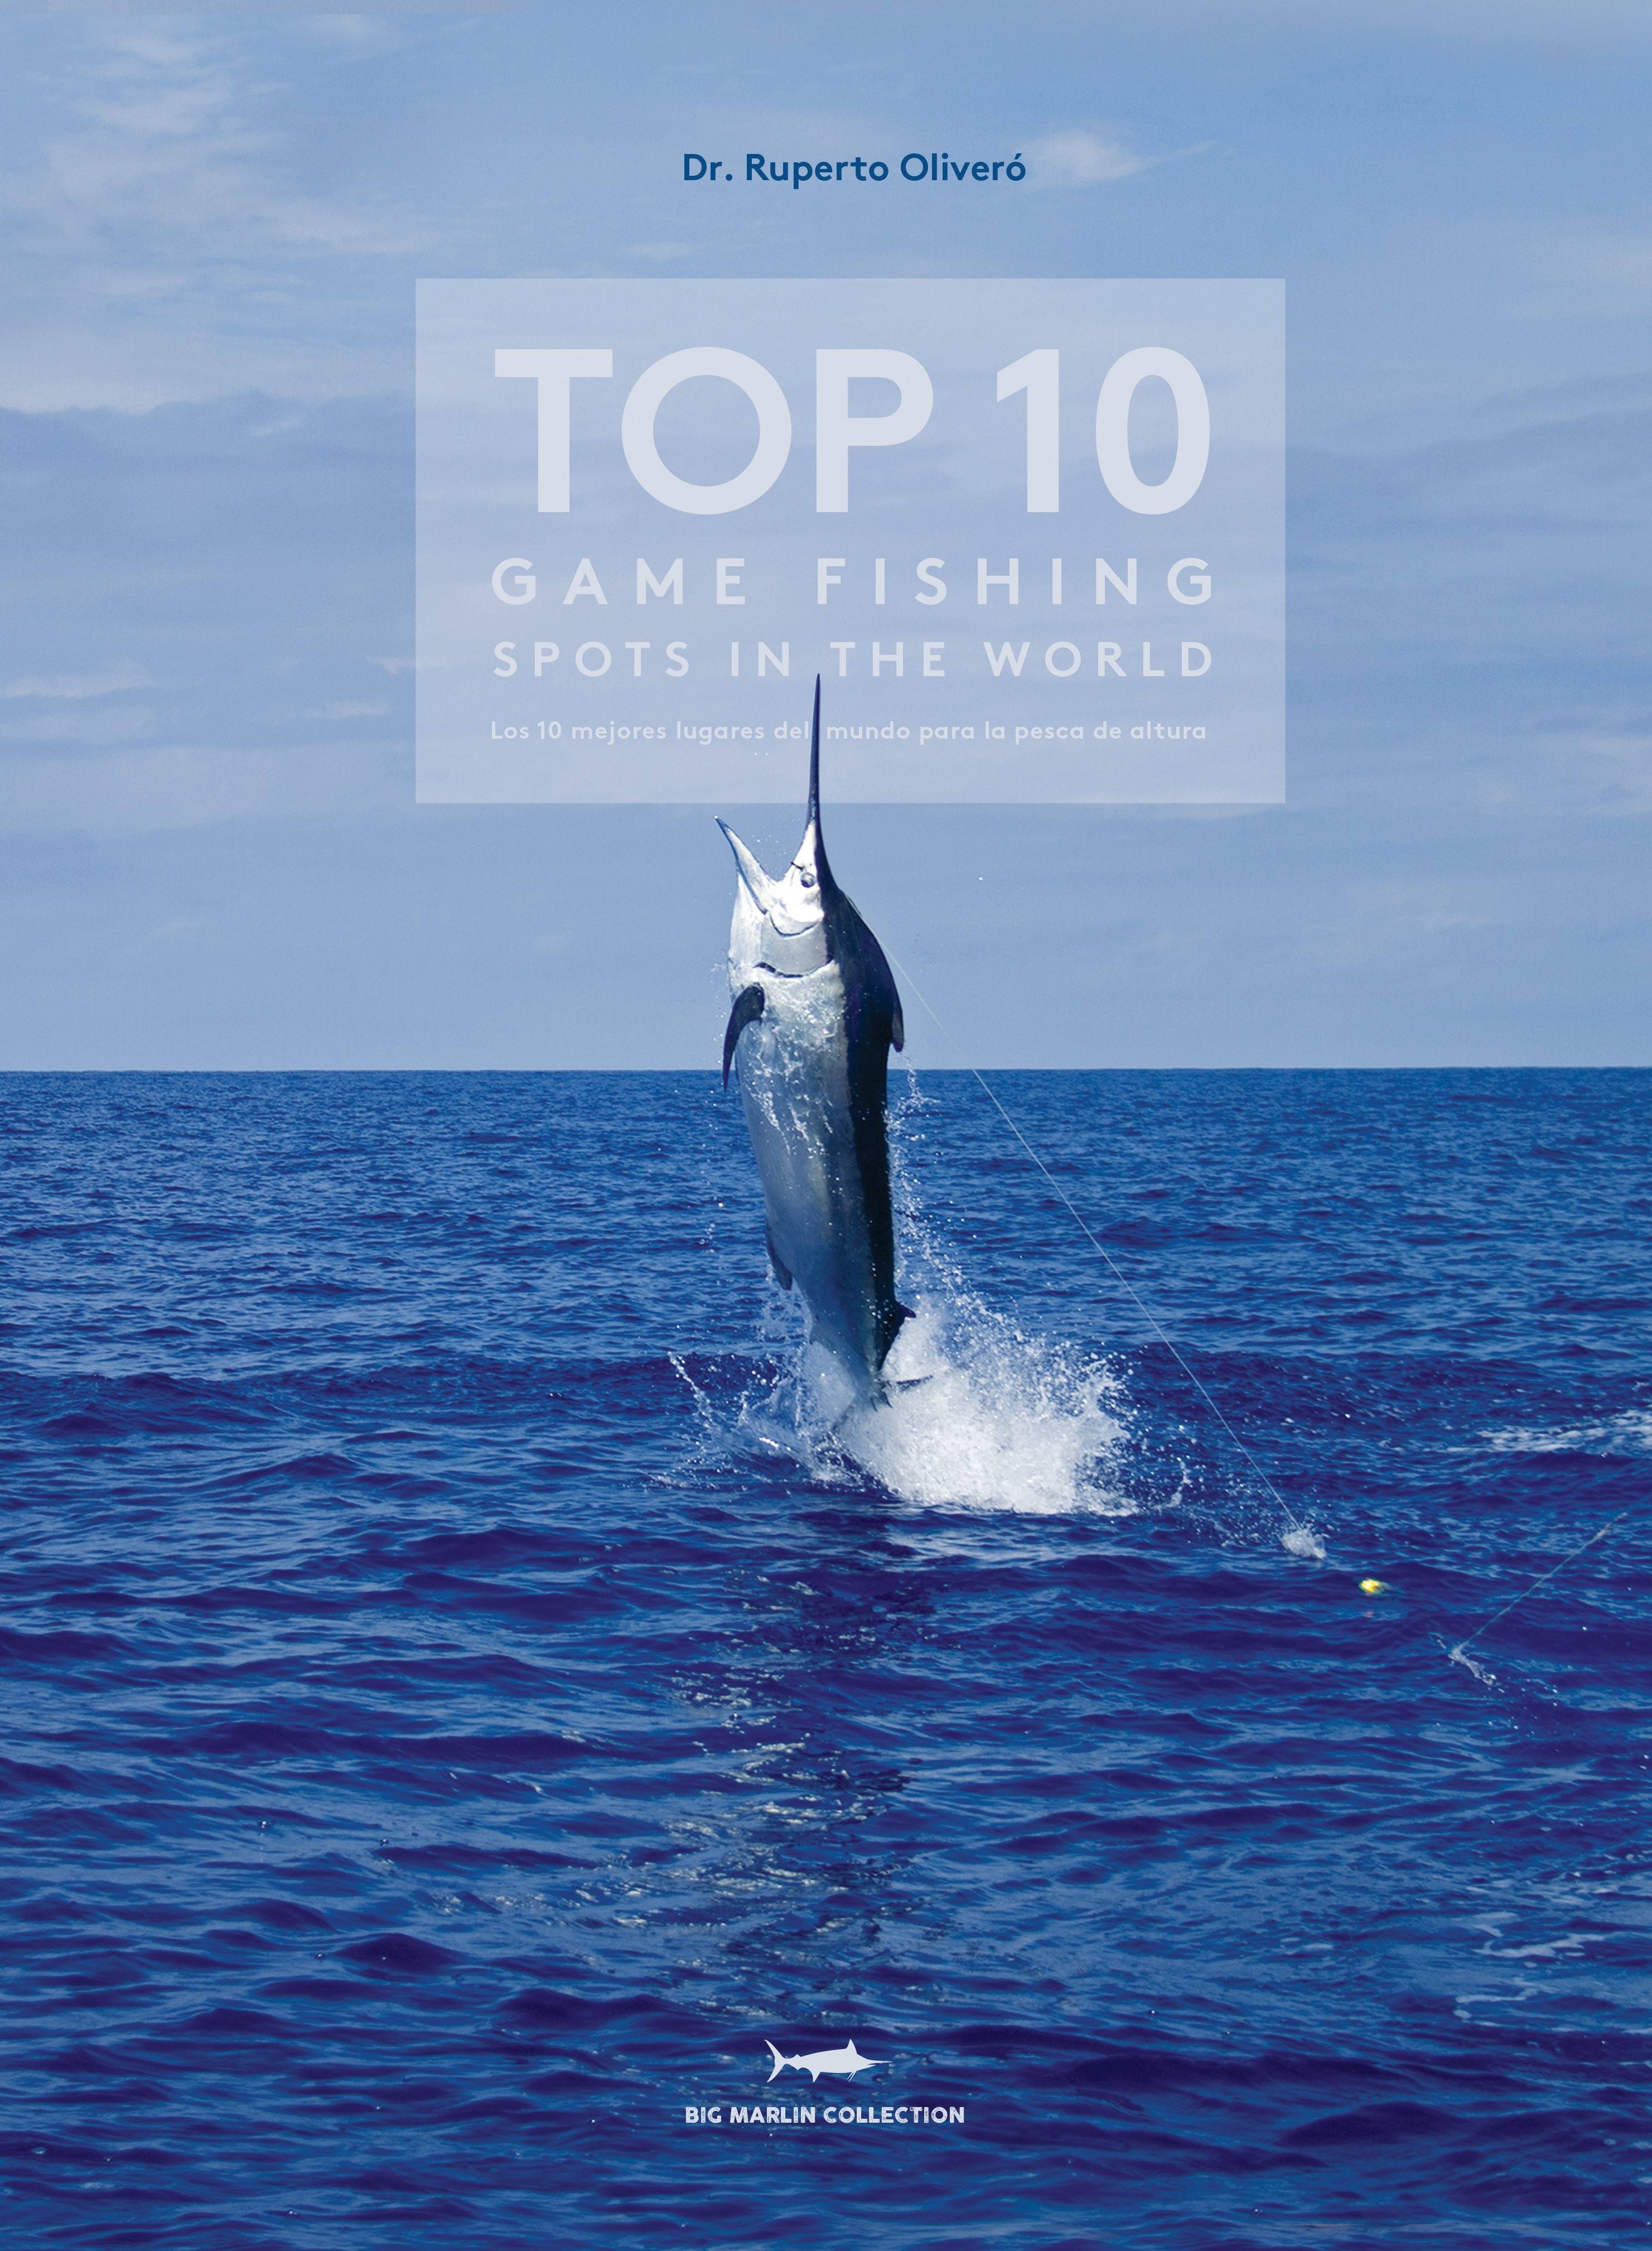 Top 10 Game Fishing Spots in the World